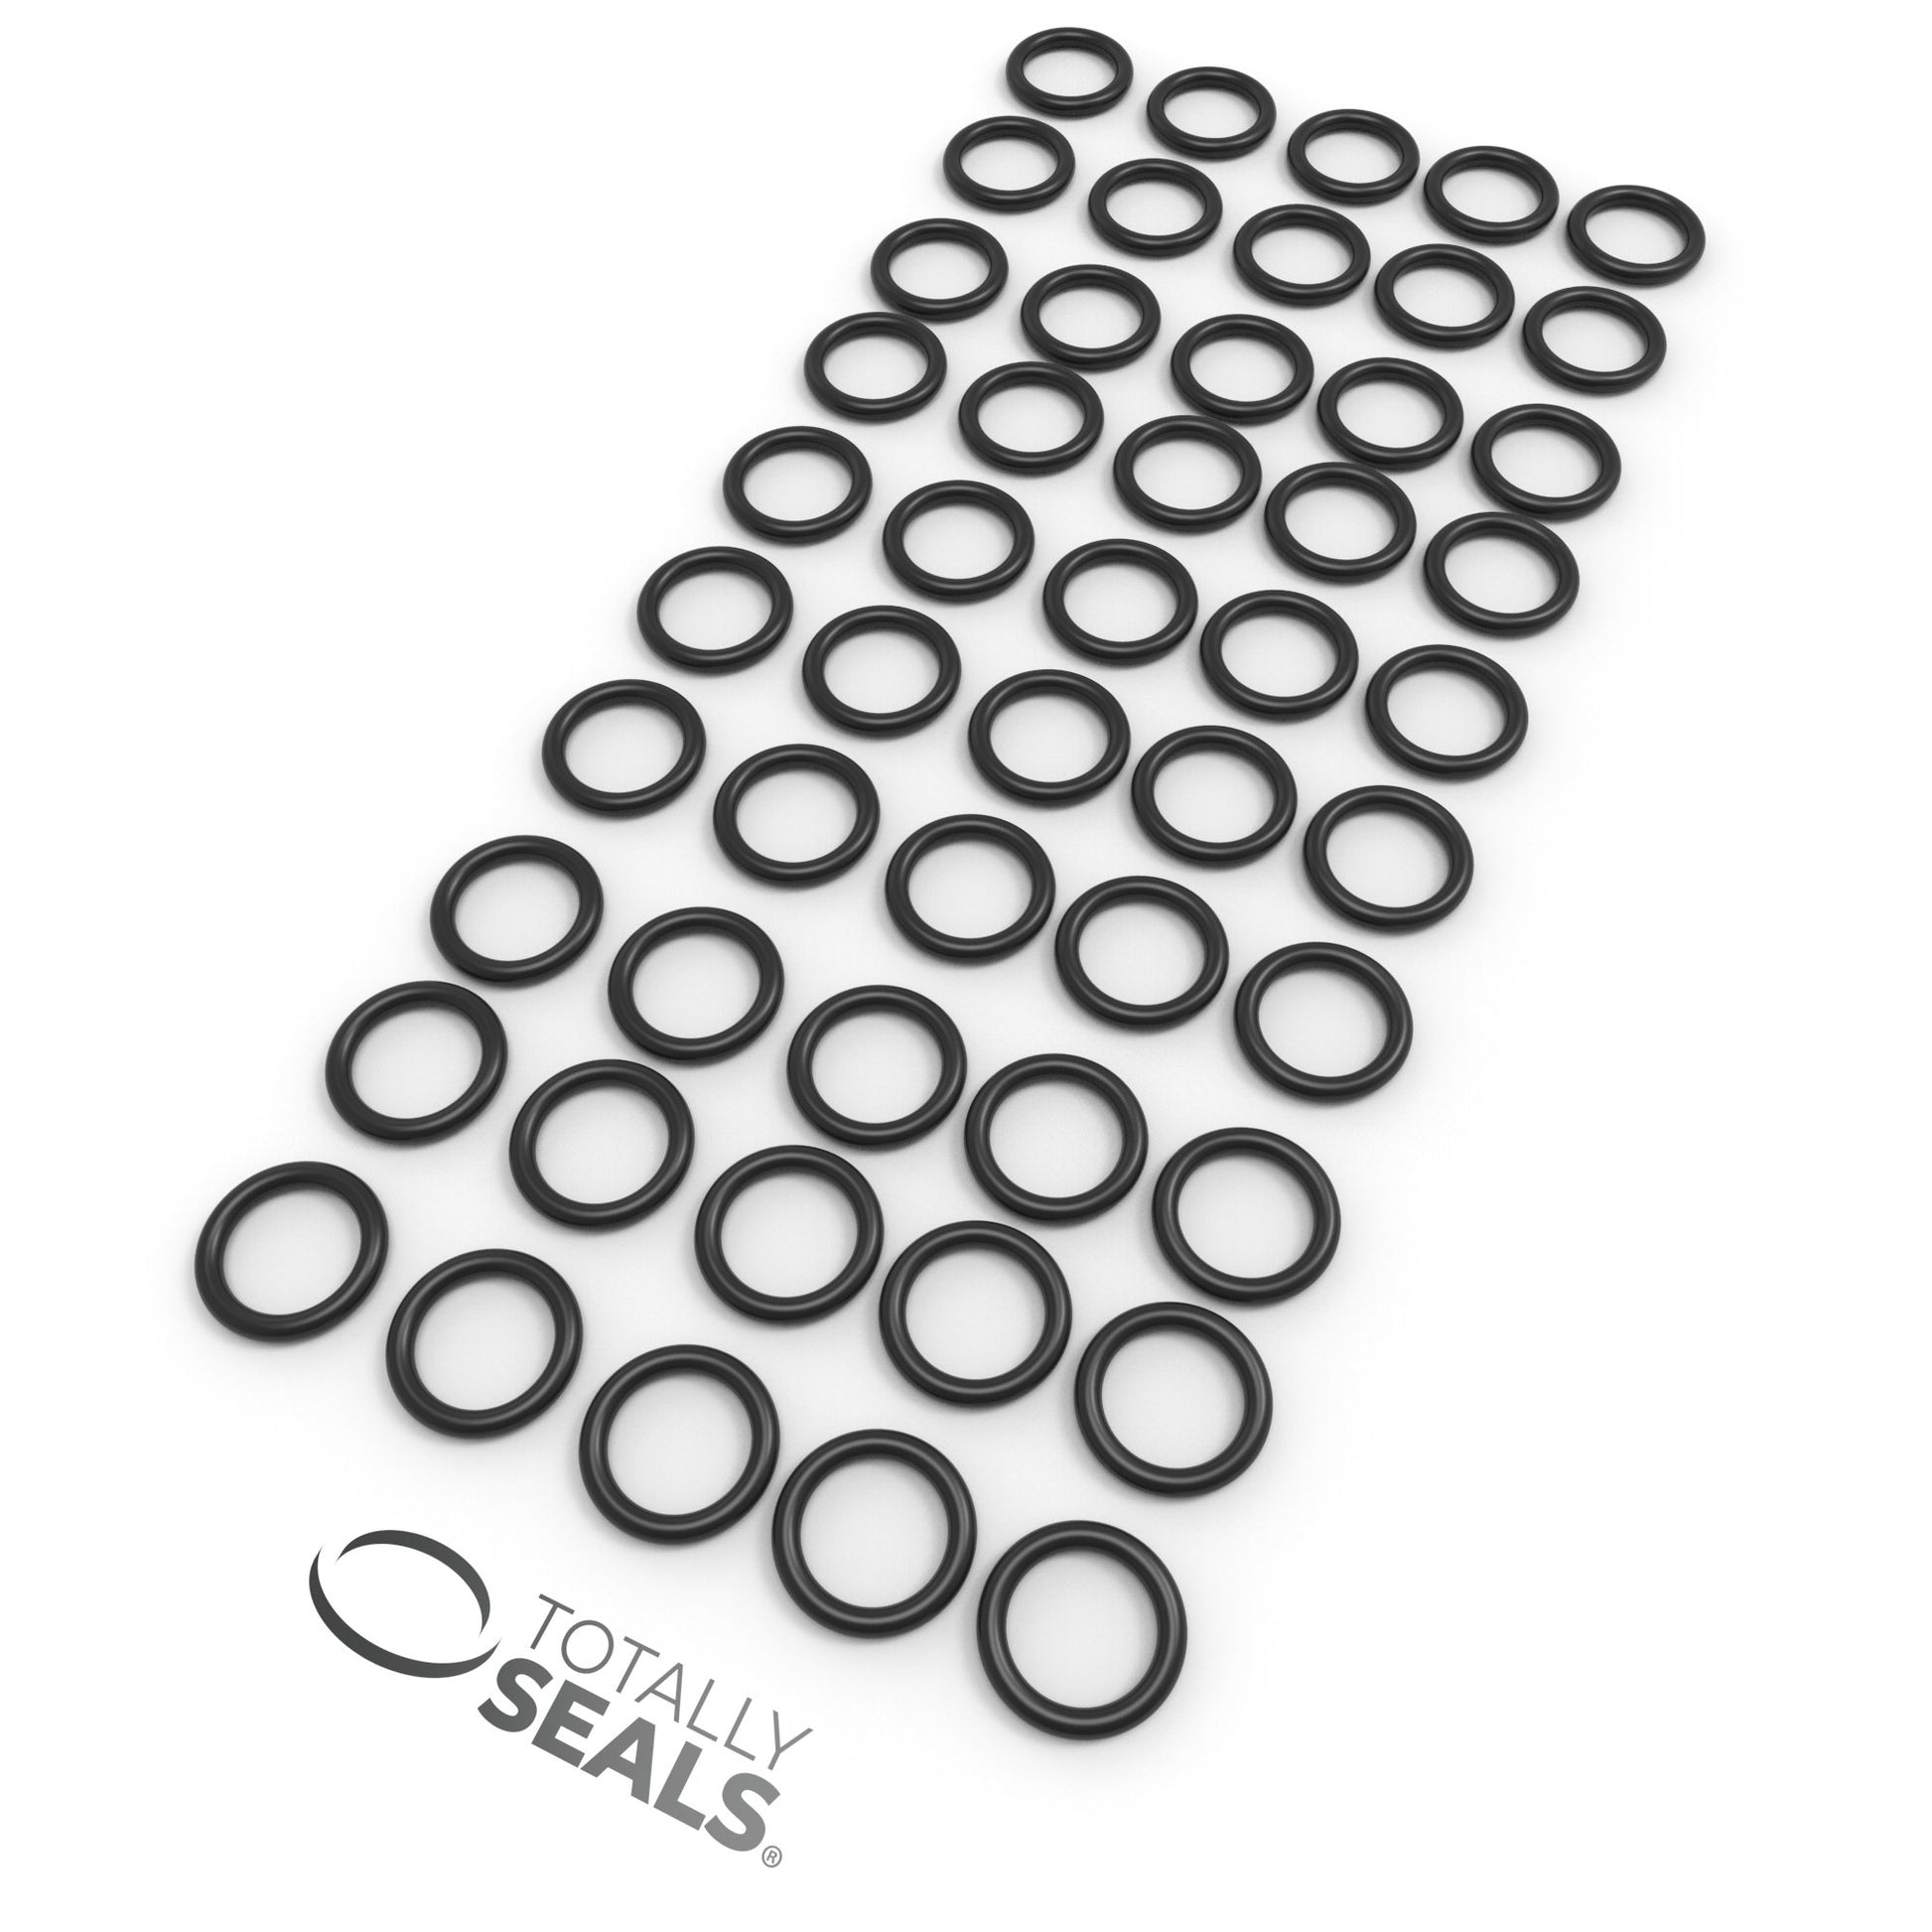 41mm x 3mm (47mm OD) Nitrile O-Rings - Totally Seals®